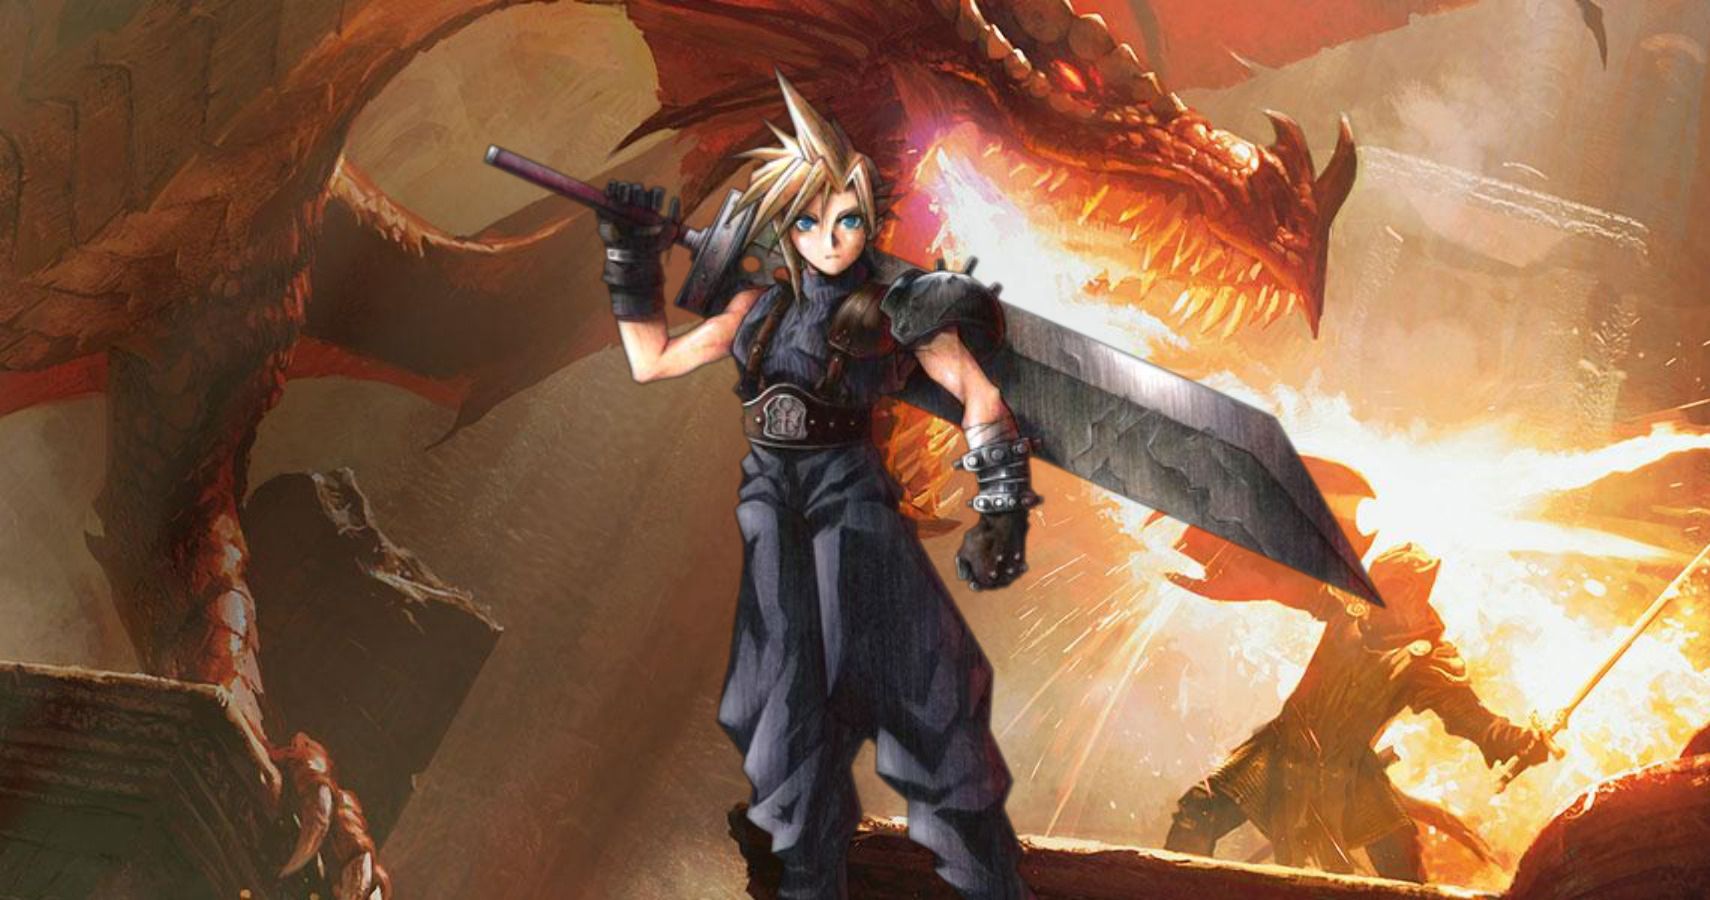 How To Build Cloud Strife In Dungeons & Dragons